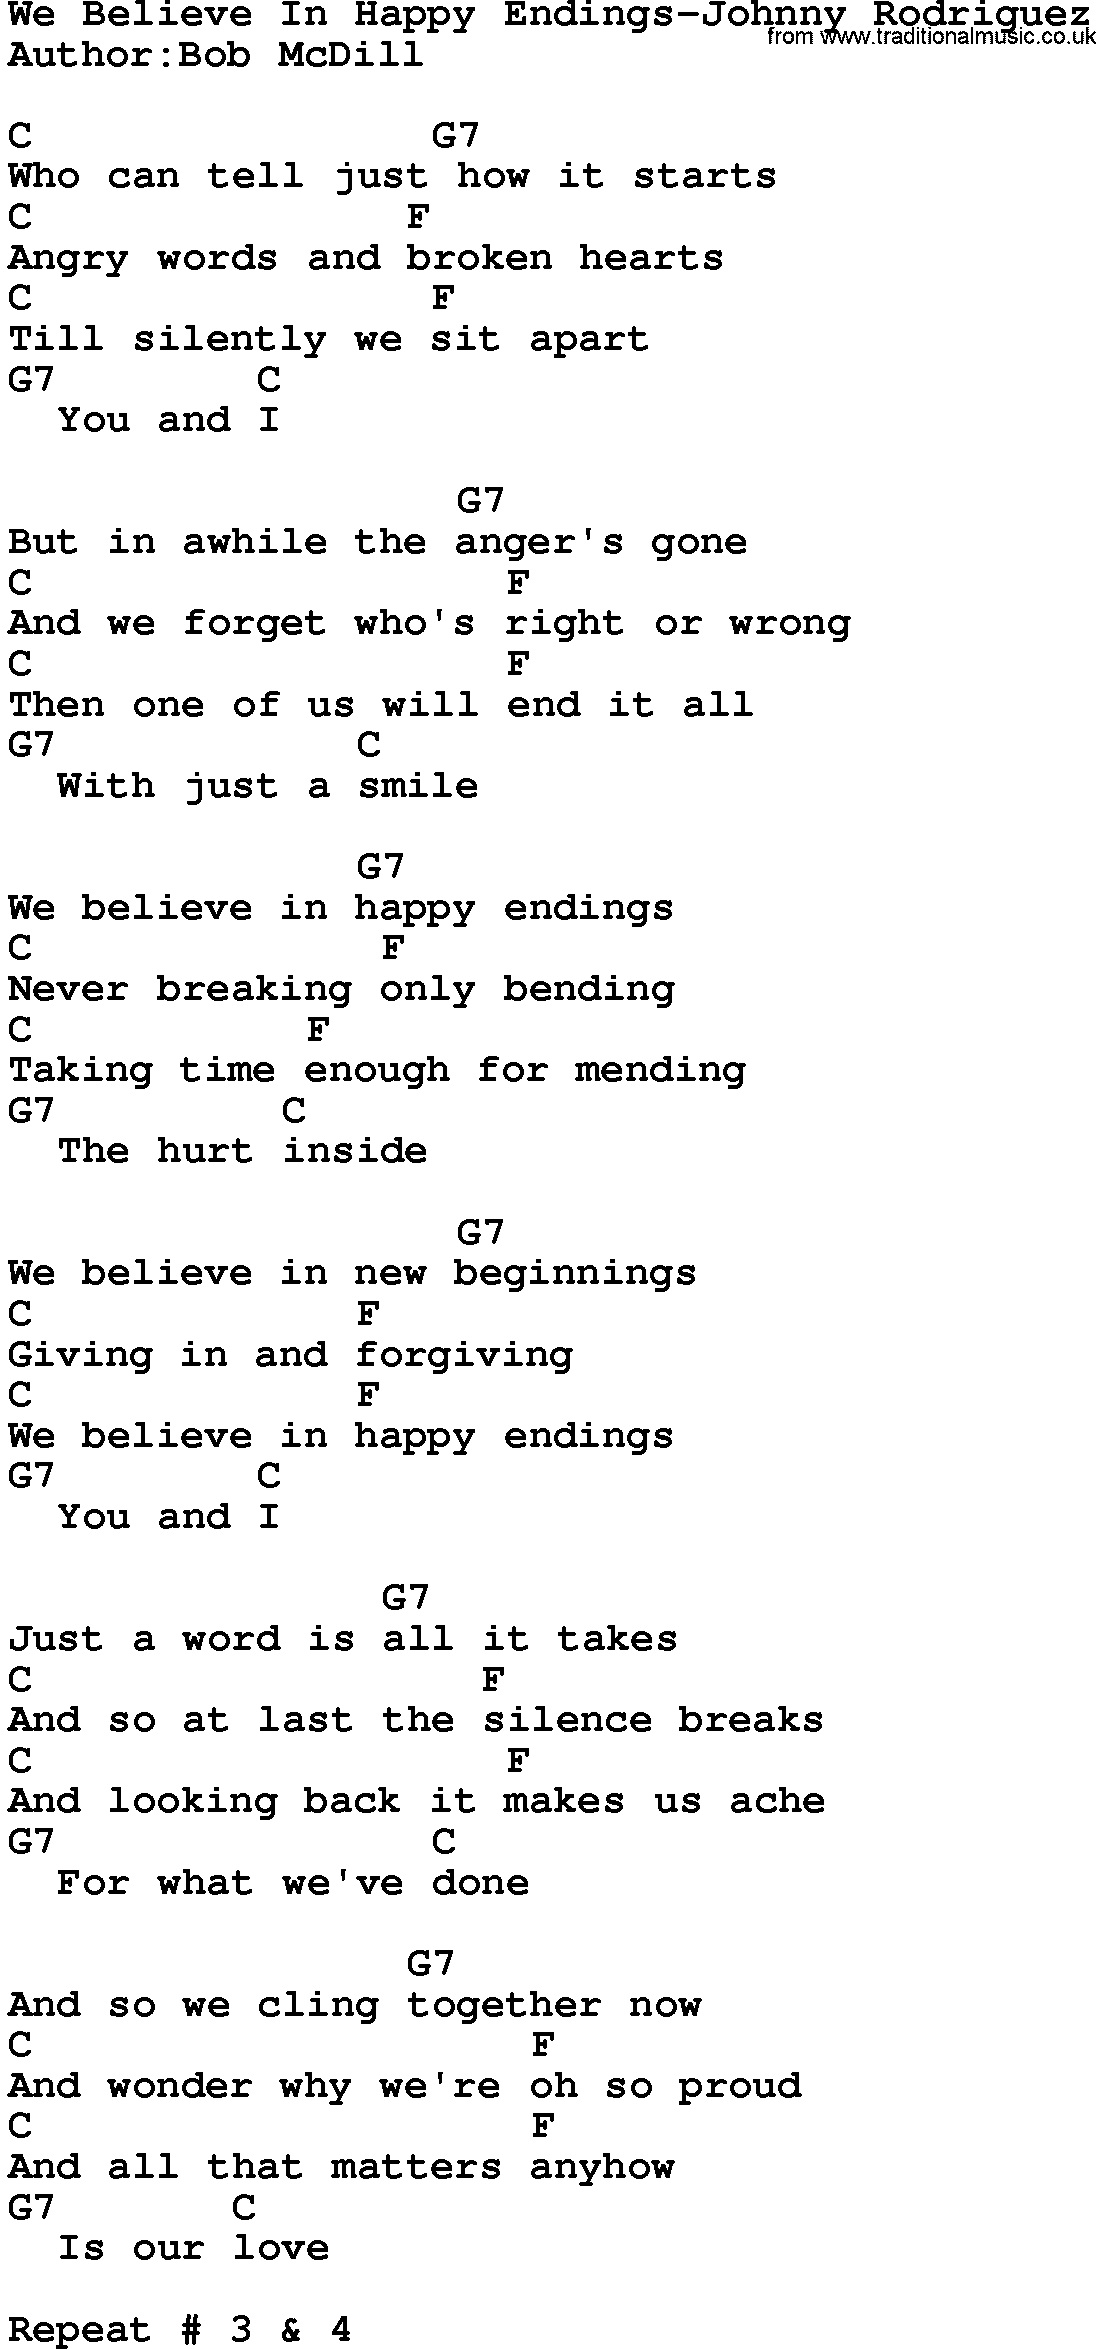 Country music song: We Believe In Happy Endings-Johnny Rodriguez lyrics and chords